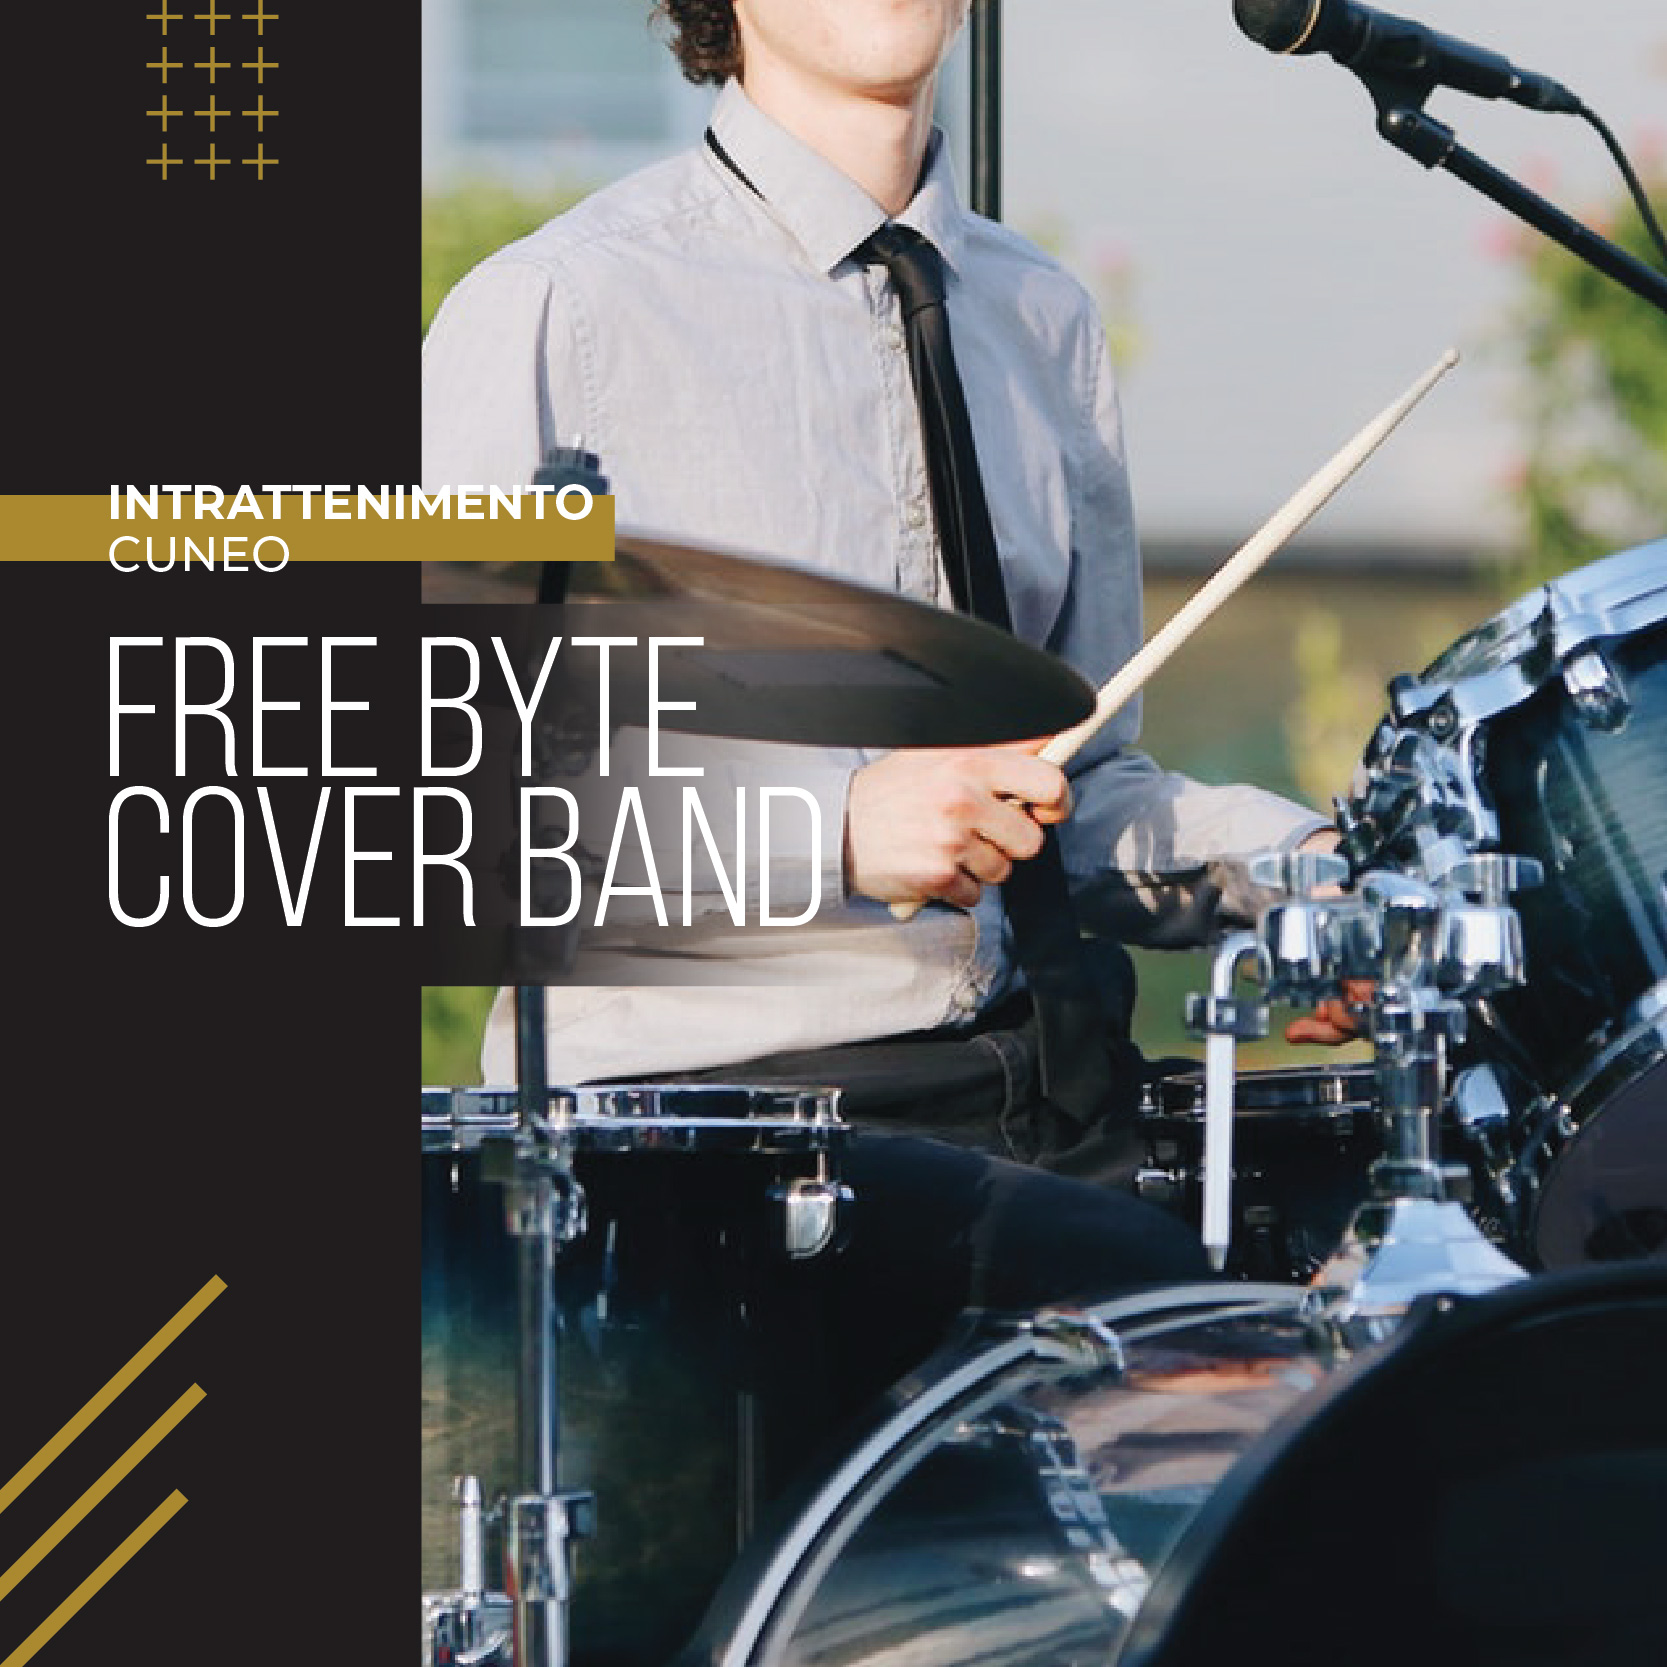 FREE BYTE - COVER BAND